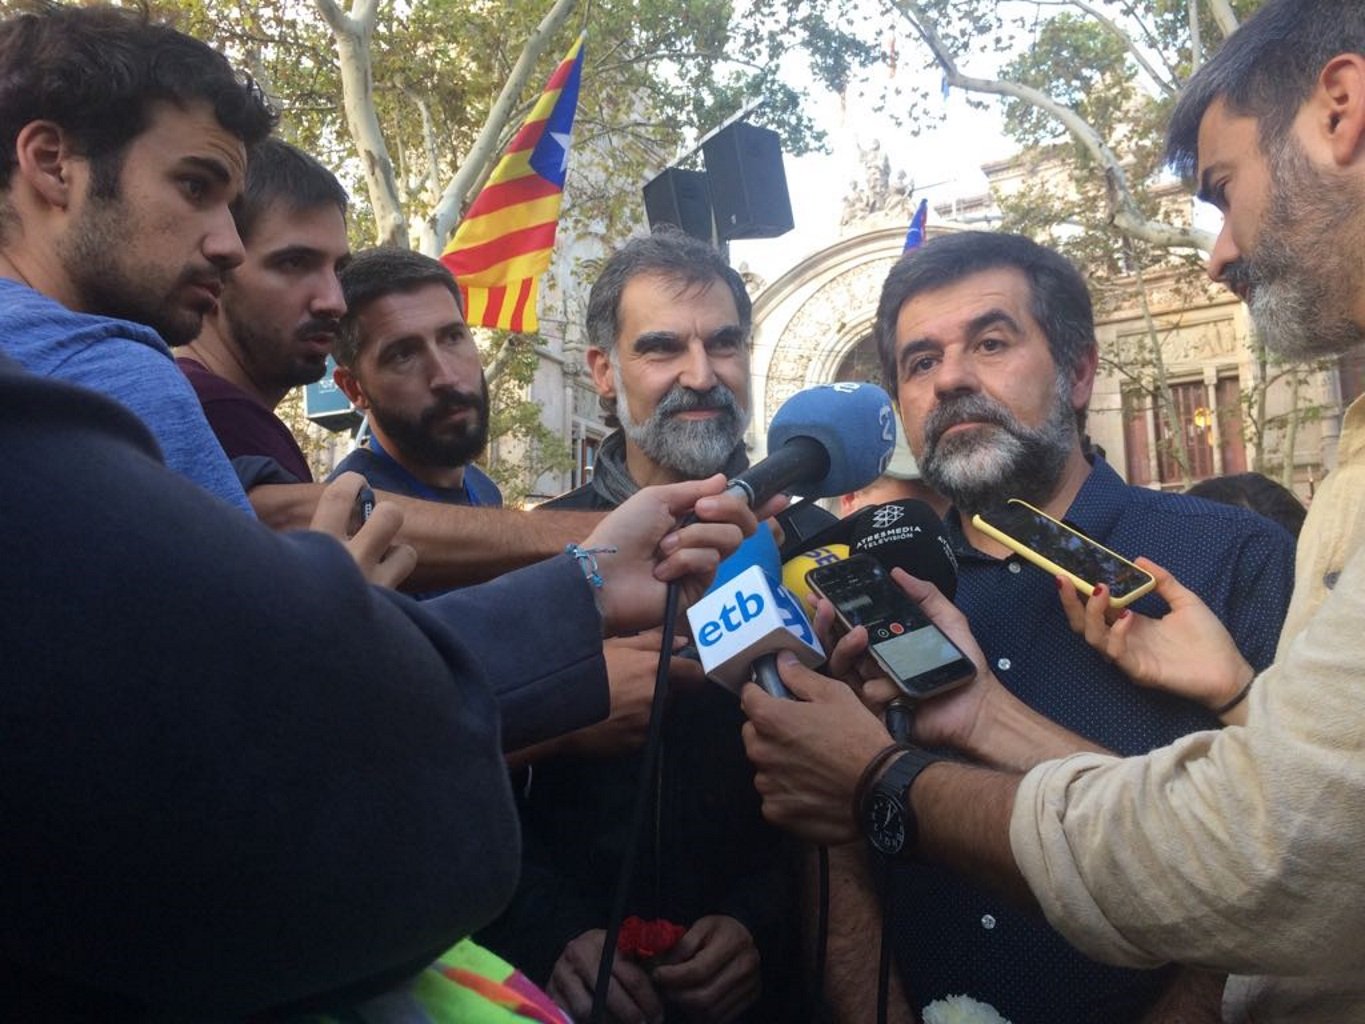 Catalan TV news in 10 minutes